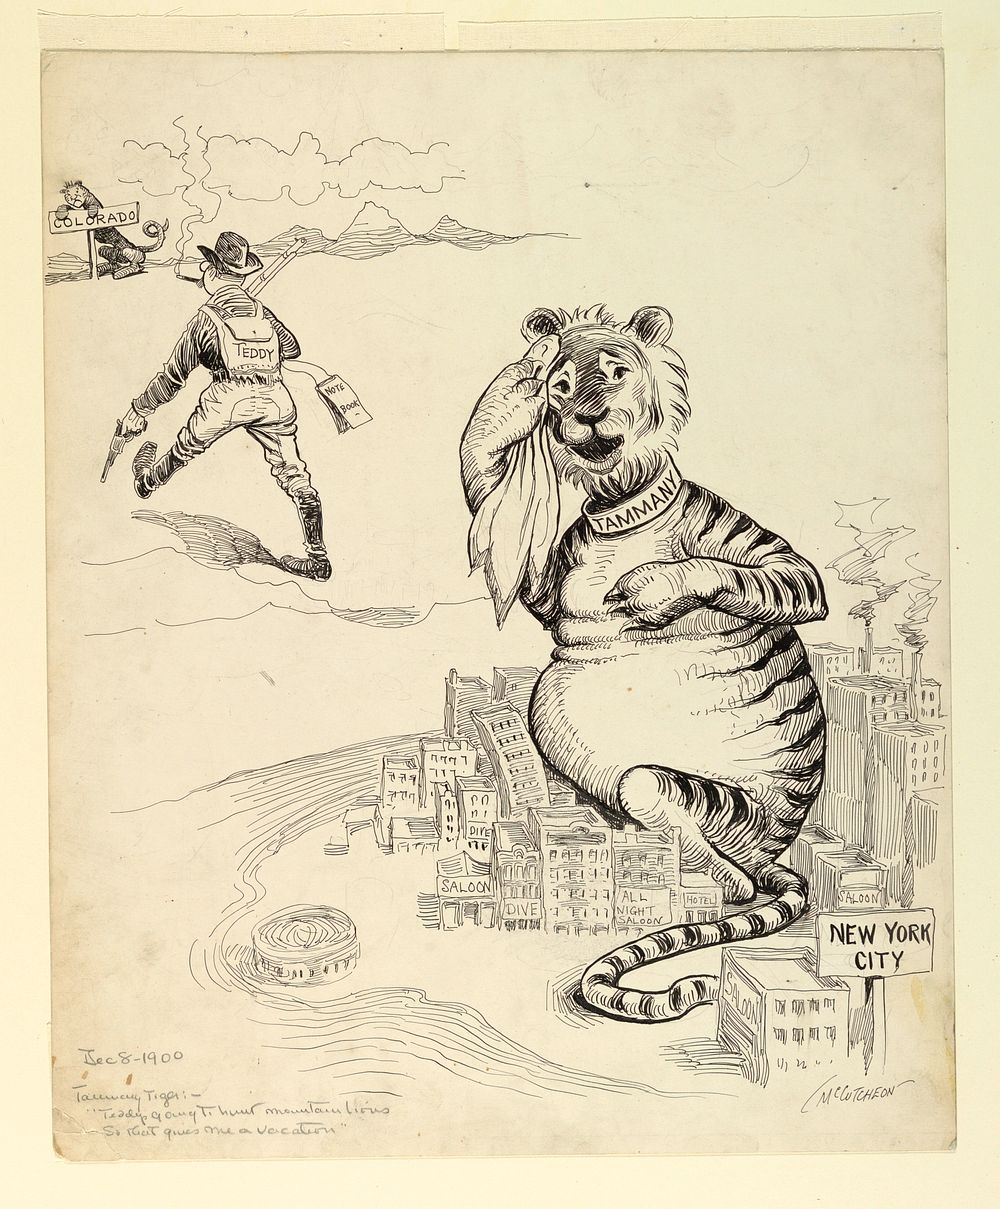 Tammany Tiger: "Teddy's going to hunt mountain lions so that gives me a vacation"